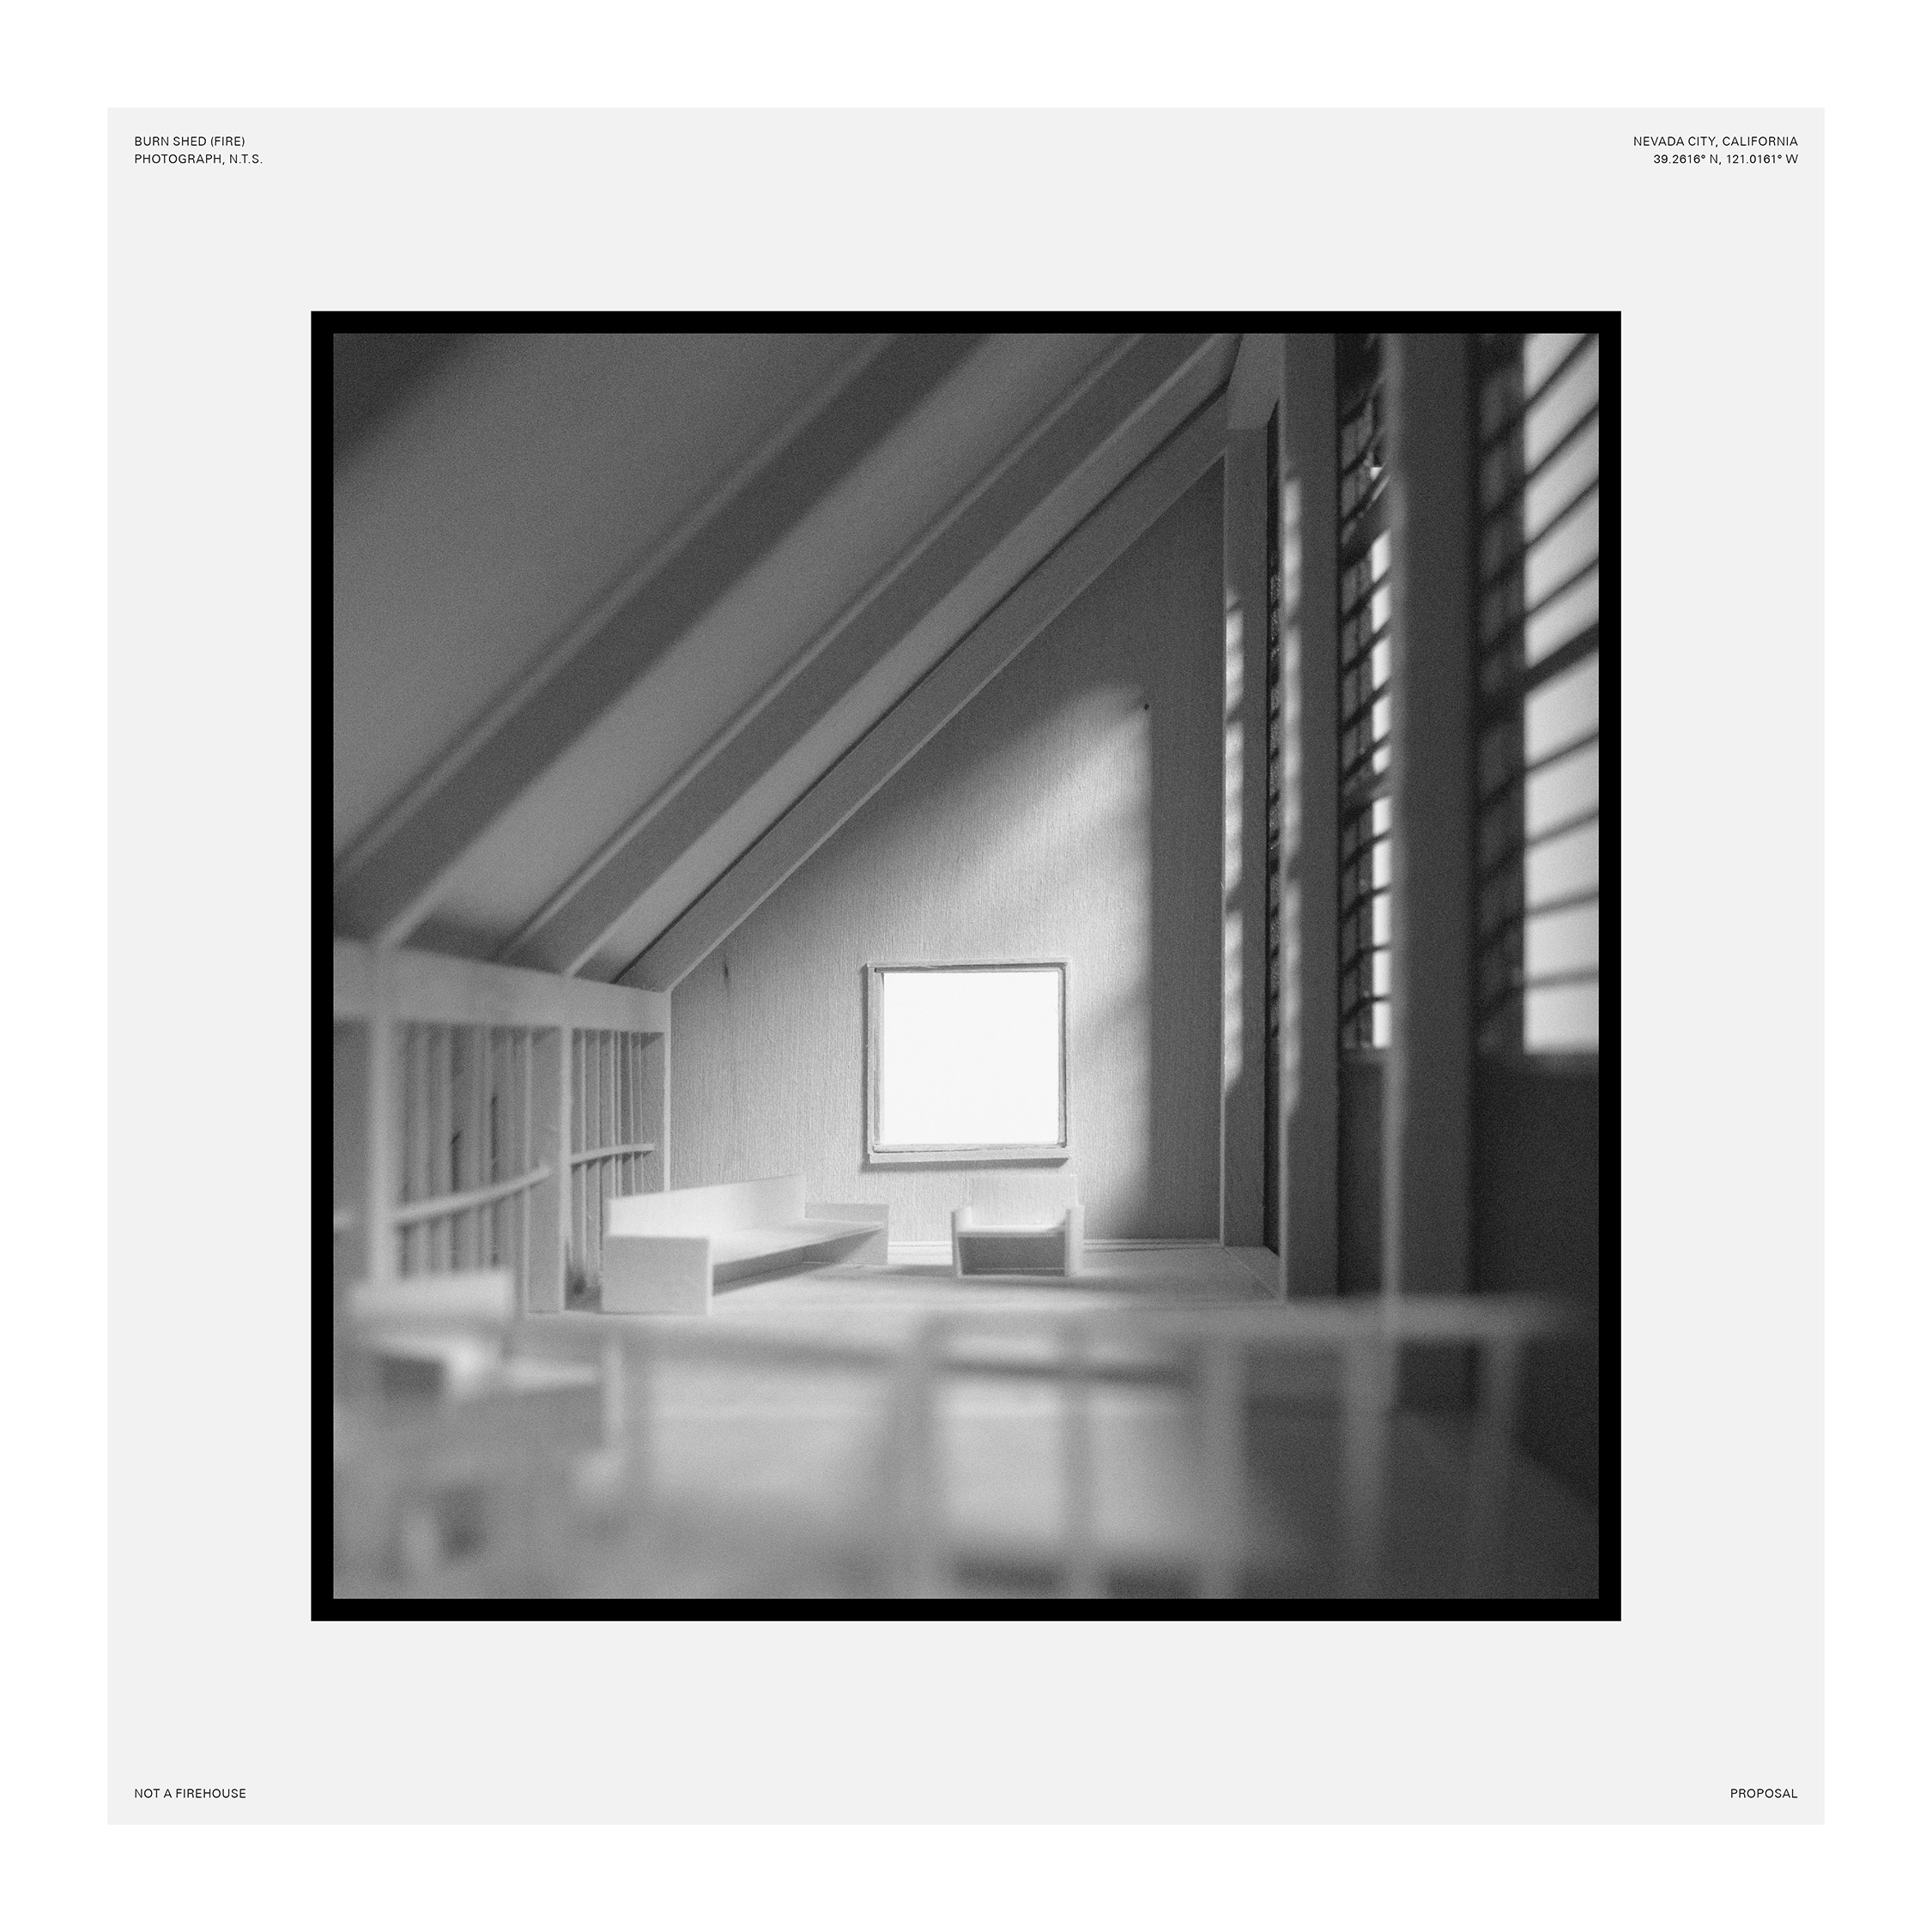 Black and white photo of interior of wood architectural model with large square window in background and blurred exposed beams and shadows in foreground.